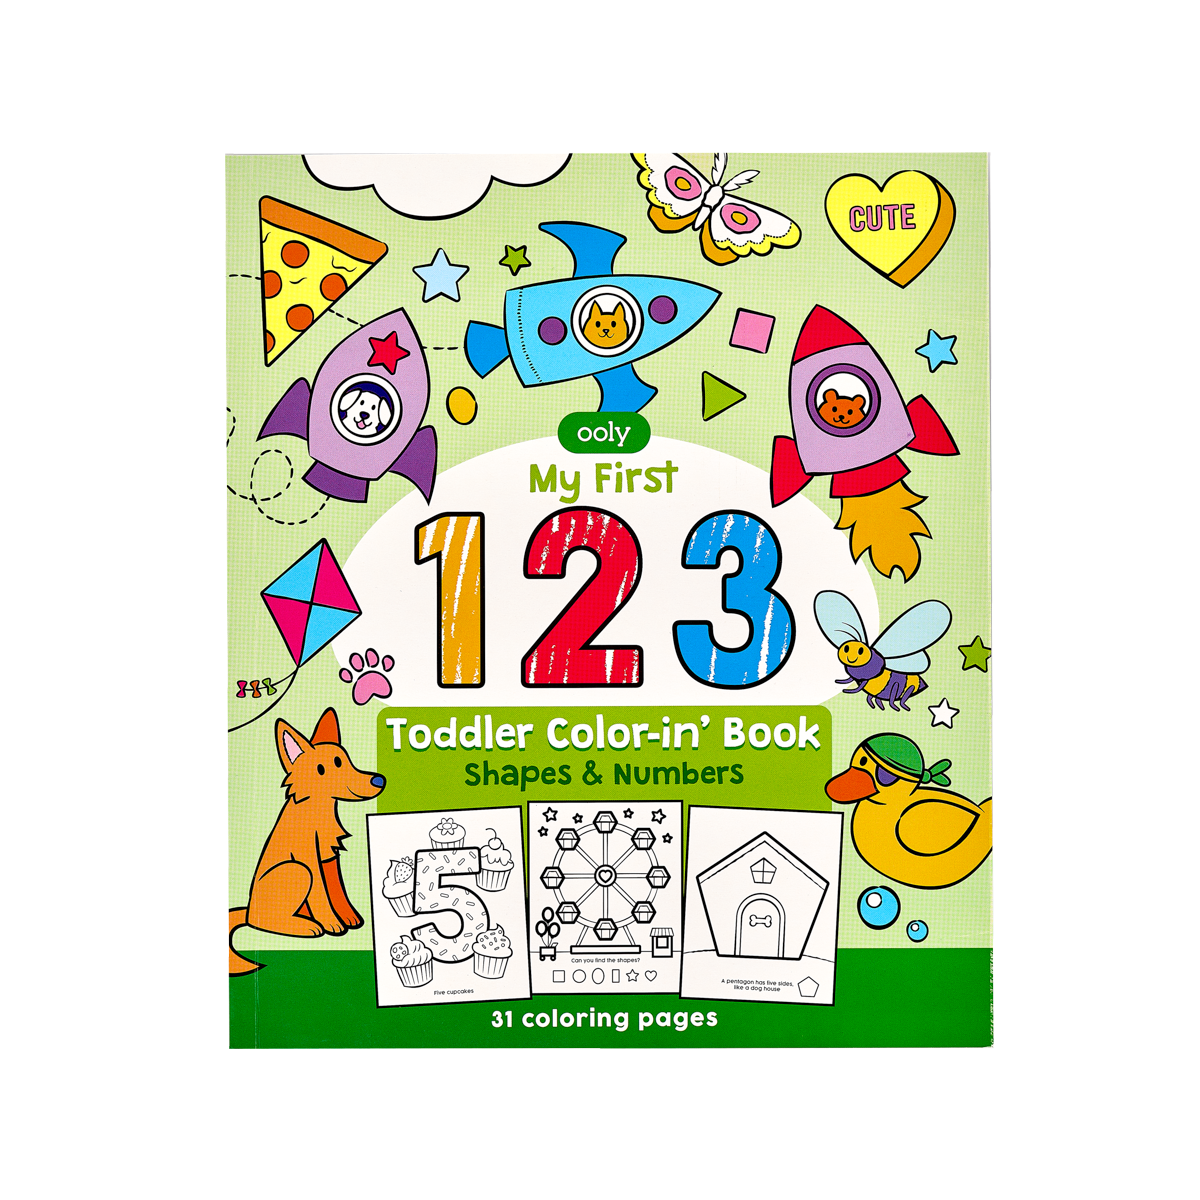 123 things BIG & JUMBO Coloring Book VOL.4: 123 Pages to color